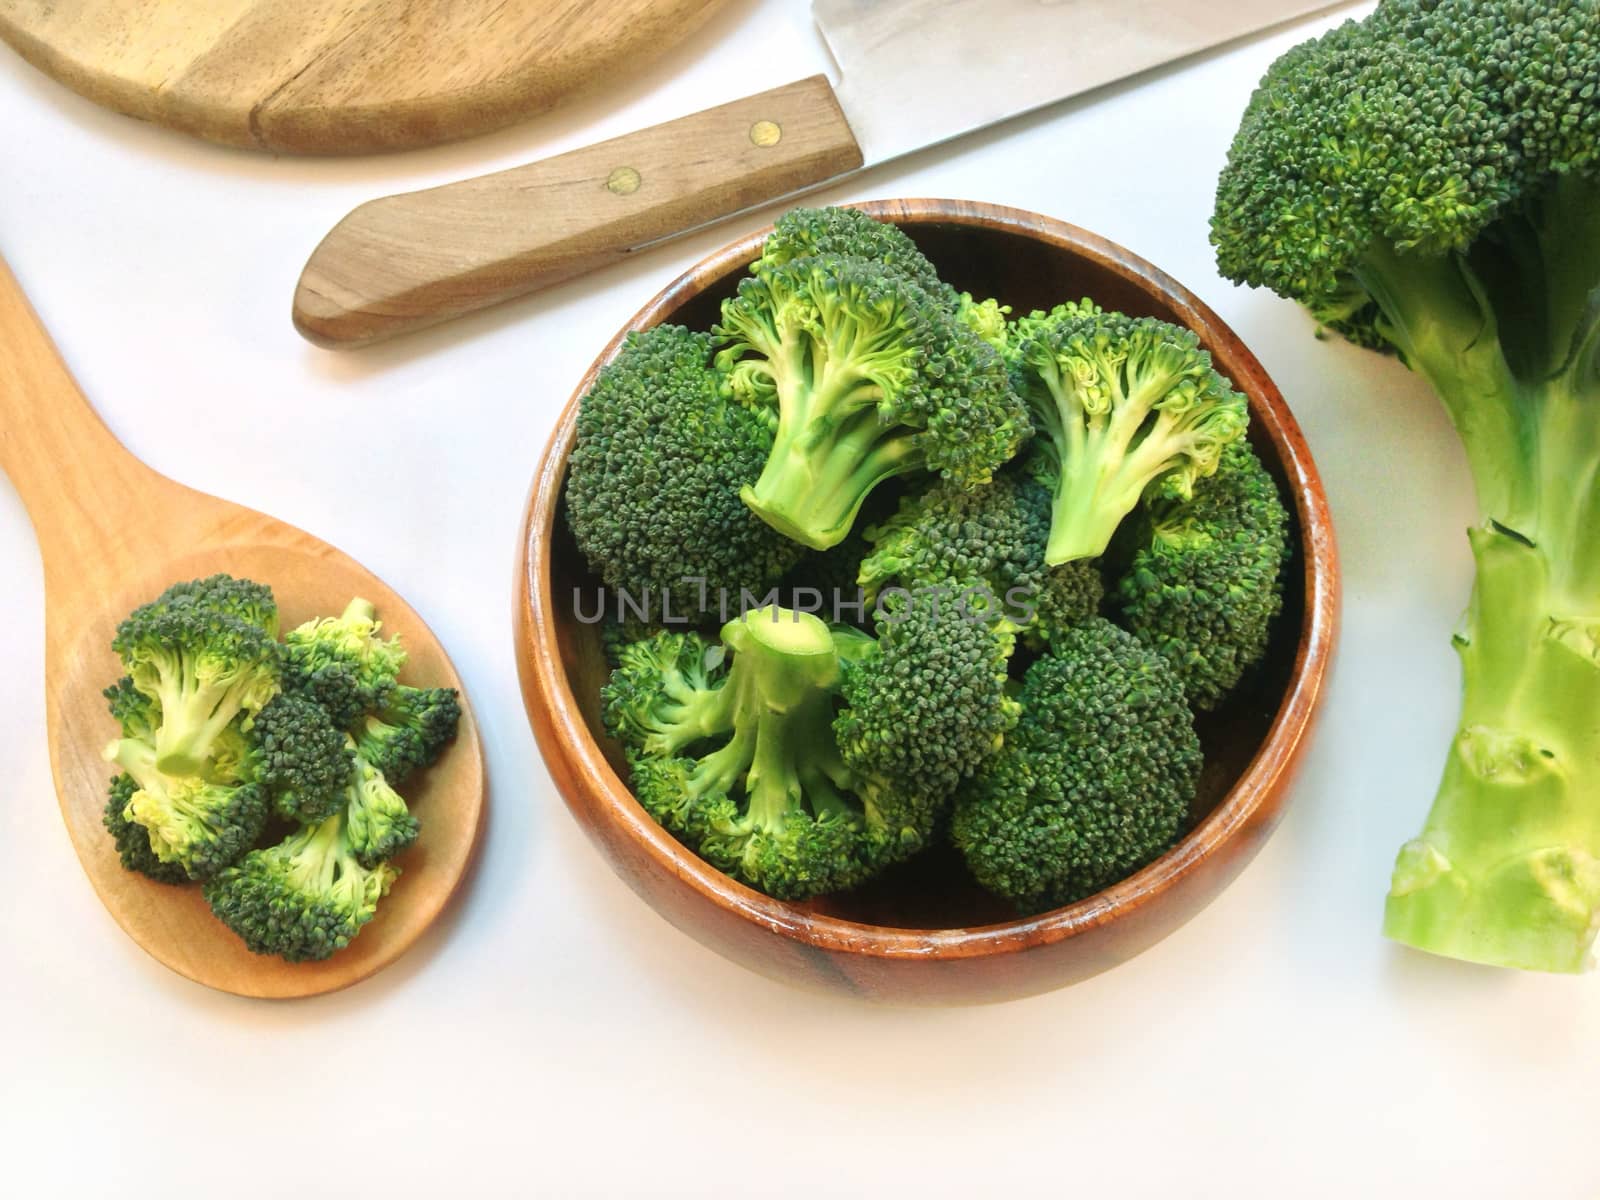 Broccoli on wooden ladle and wooden bowl, cutting board, knife on white background